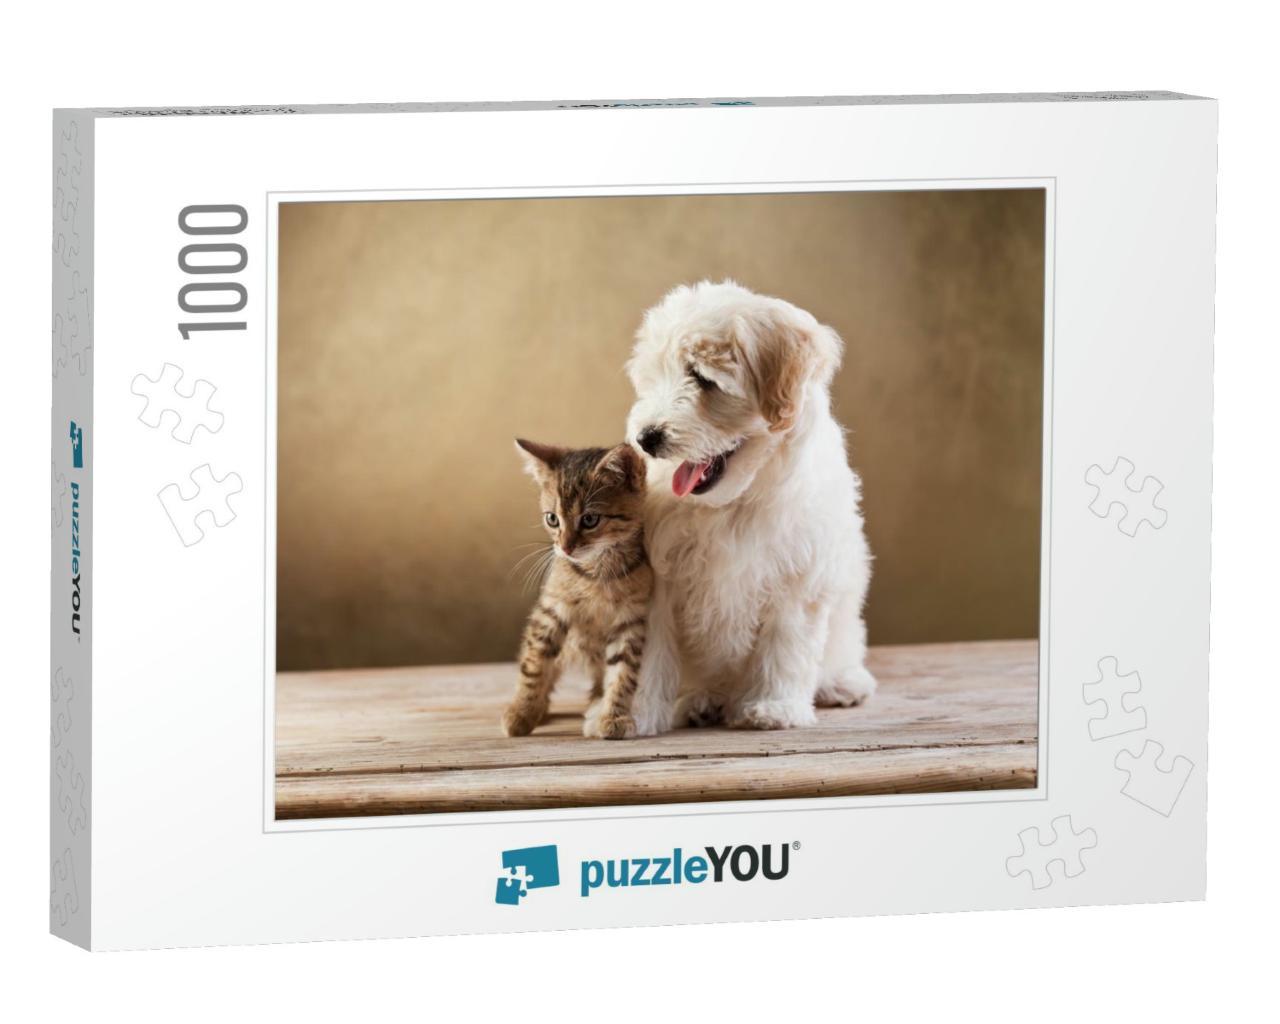 Best Friends - Kitten & Small Fluffy Dog Looking Sideways... Jigsaw Puzzle with 1000 pieces